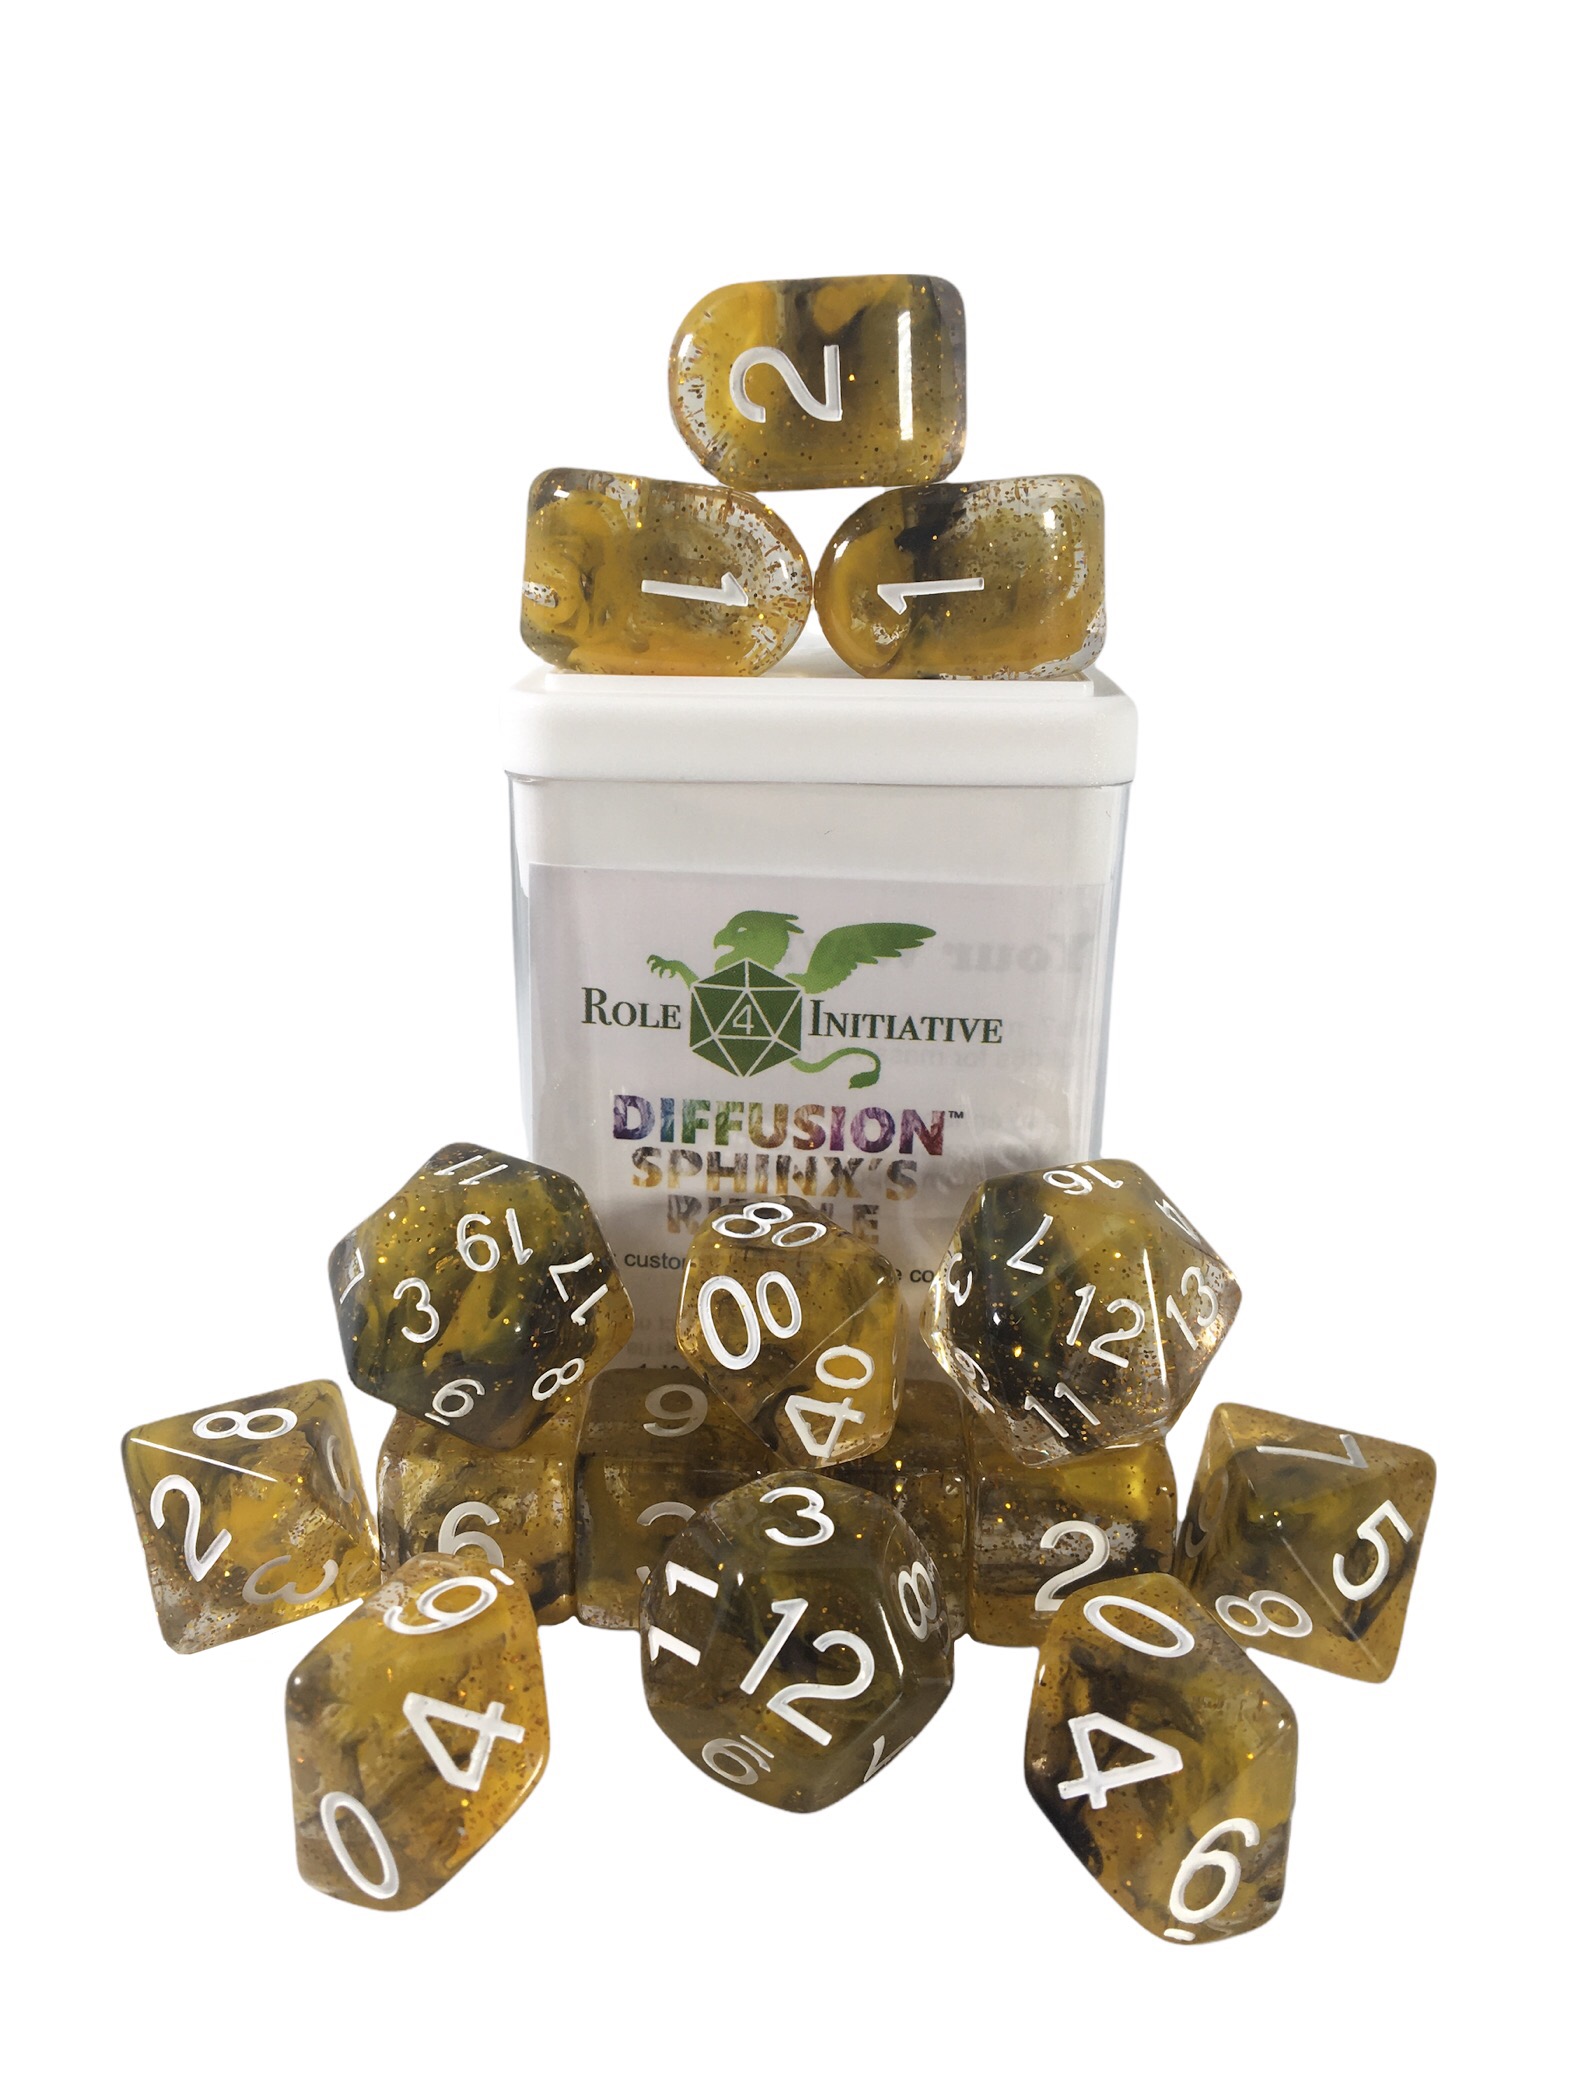 Role 4 Initiative: Polyhedral 15 Dice Set: Diffusion Sphinxs Riddle 